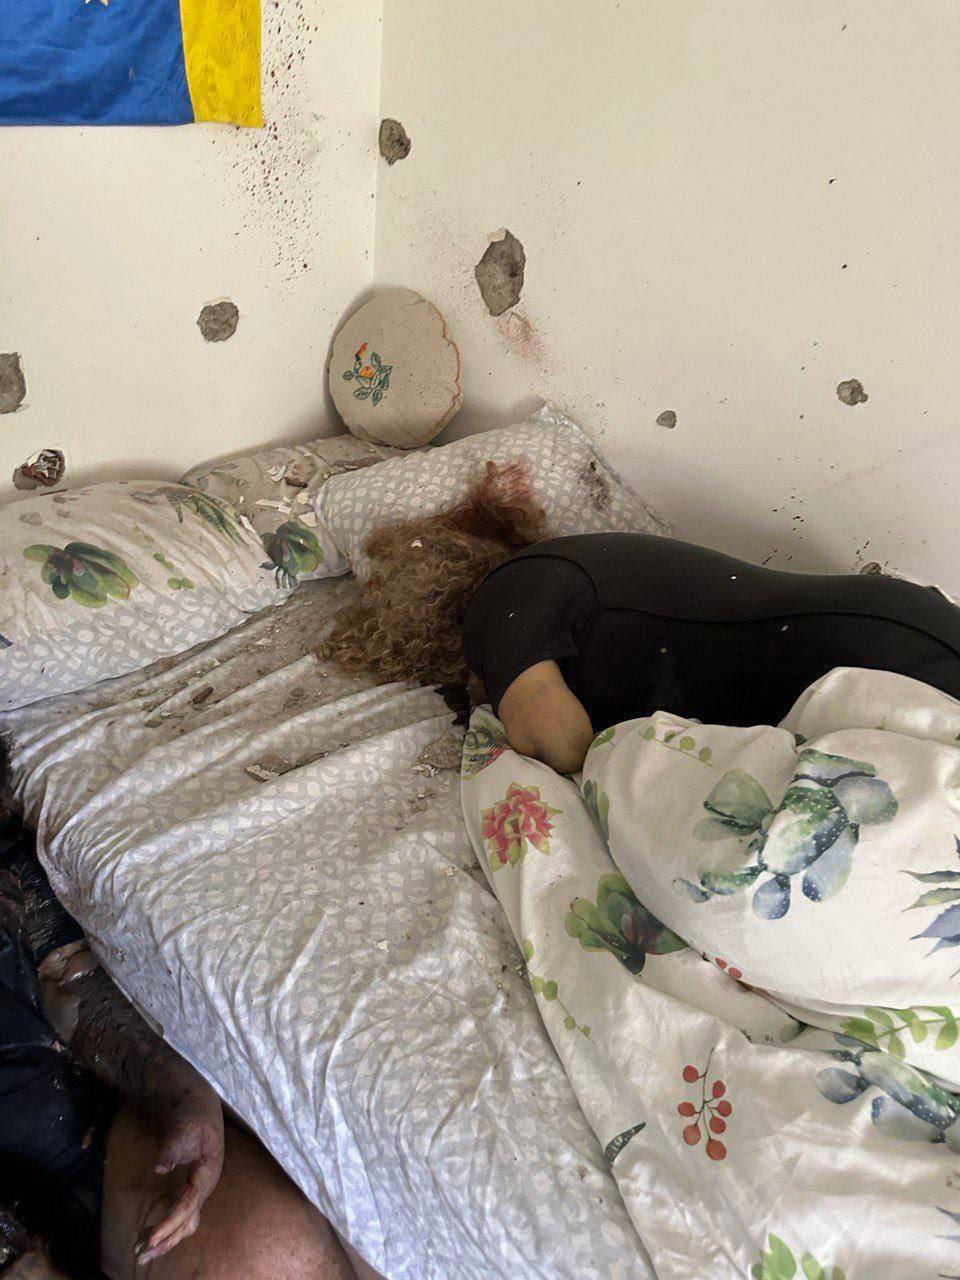 Israeli woman slaughtered on her bed